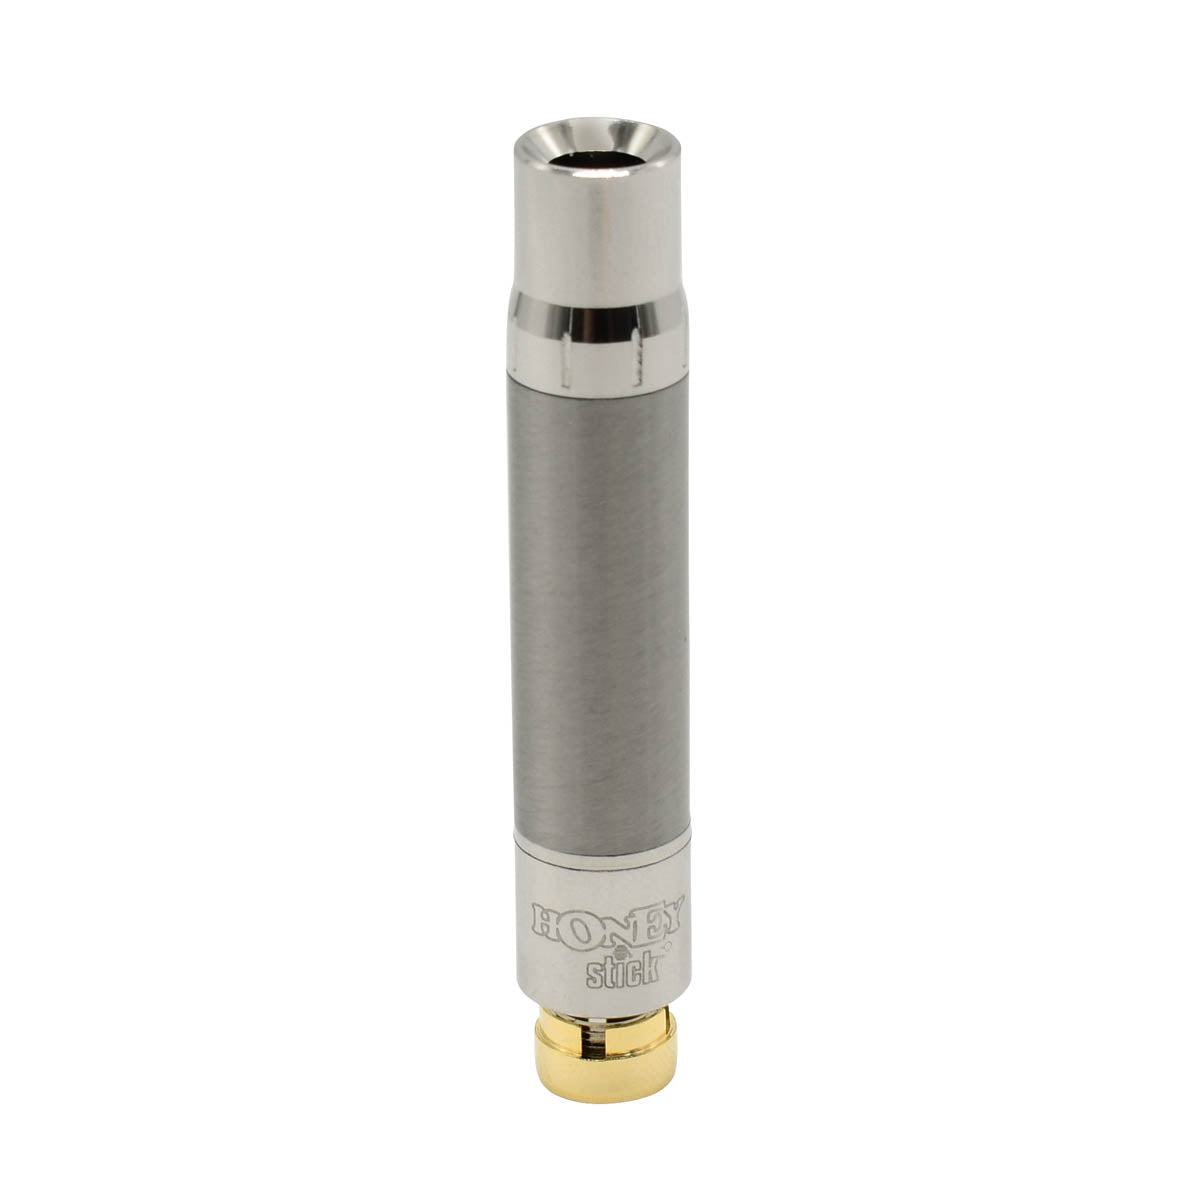 BeeKeeper Thermo Stick Dab Pen